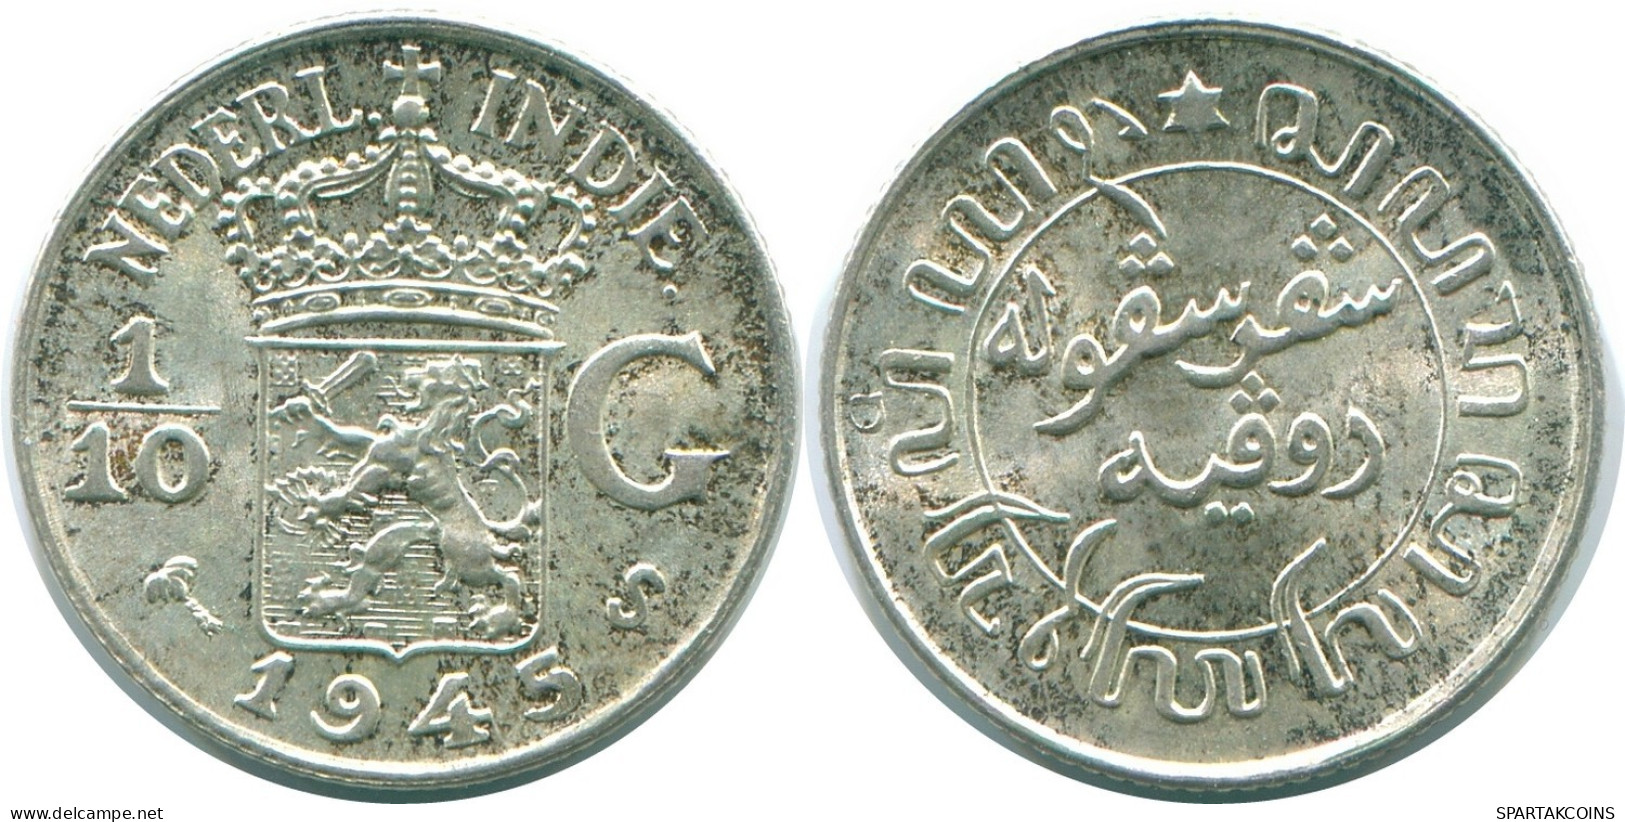 1/10 GULDEN 1945 S NETHERLANDS EAST INDIES SILVER Colonial Coin #NL14107.3.U.A - Indes Neerlandesas